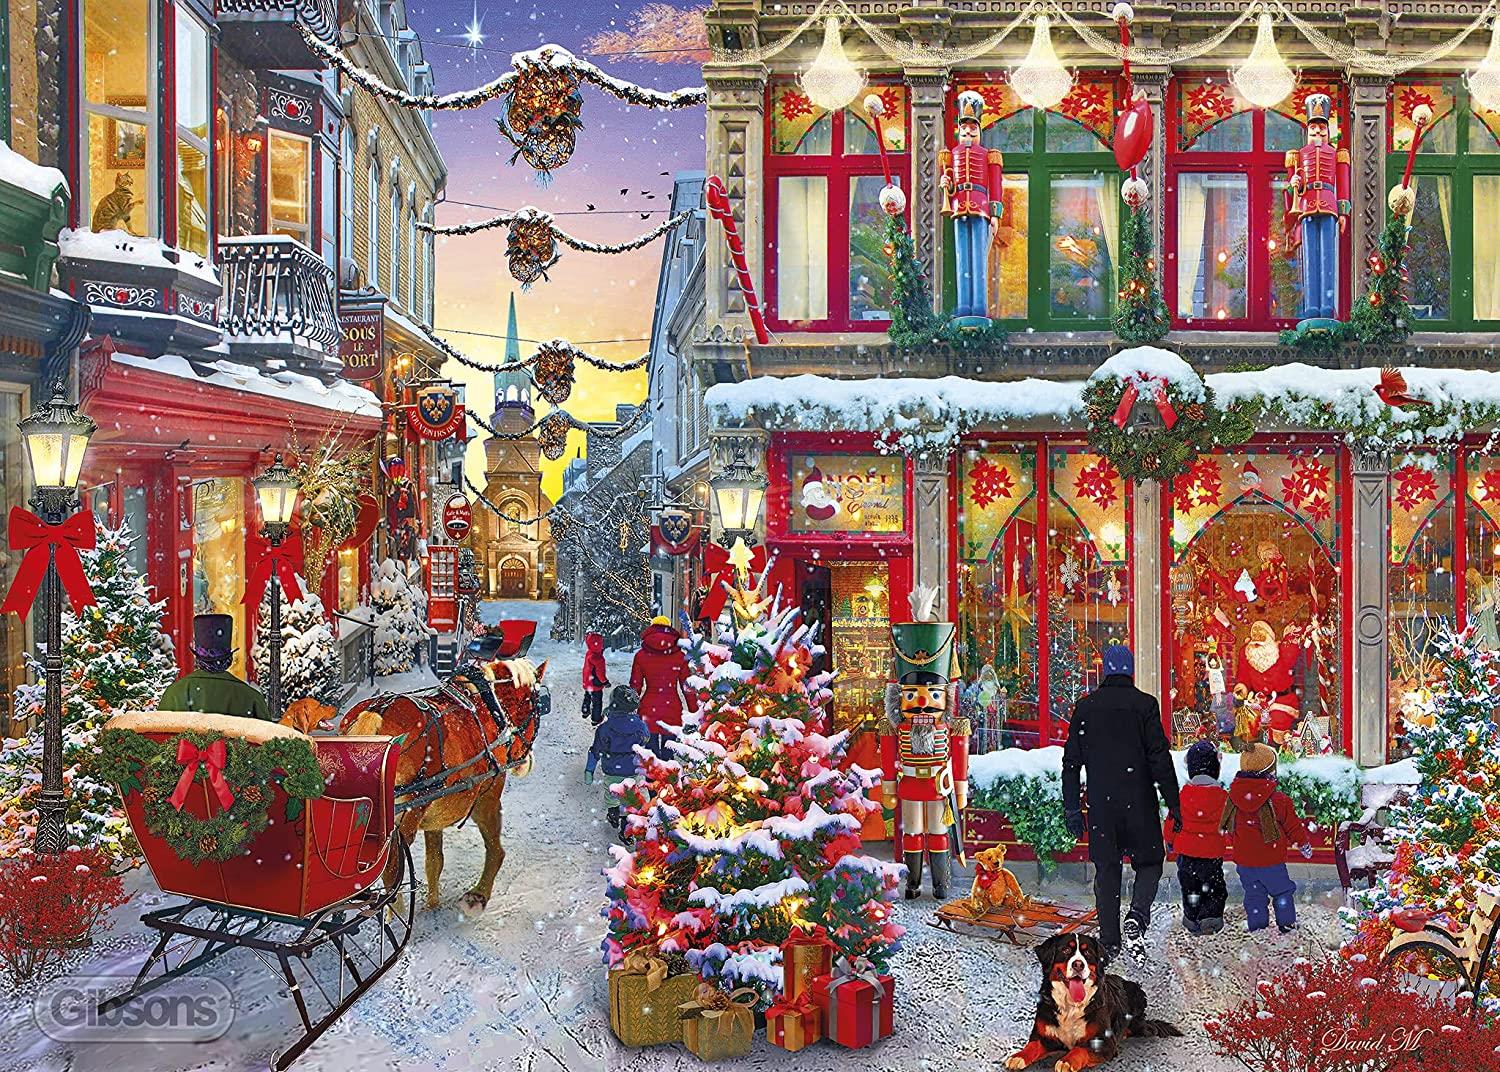 Gibsons Festive Boulevard Jigsaw Puzzle (500 Pieces) - DAMAGED